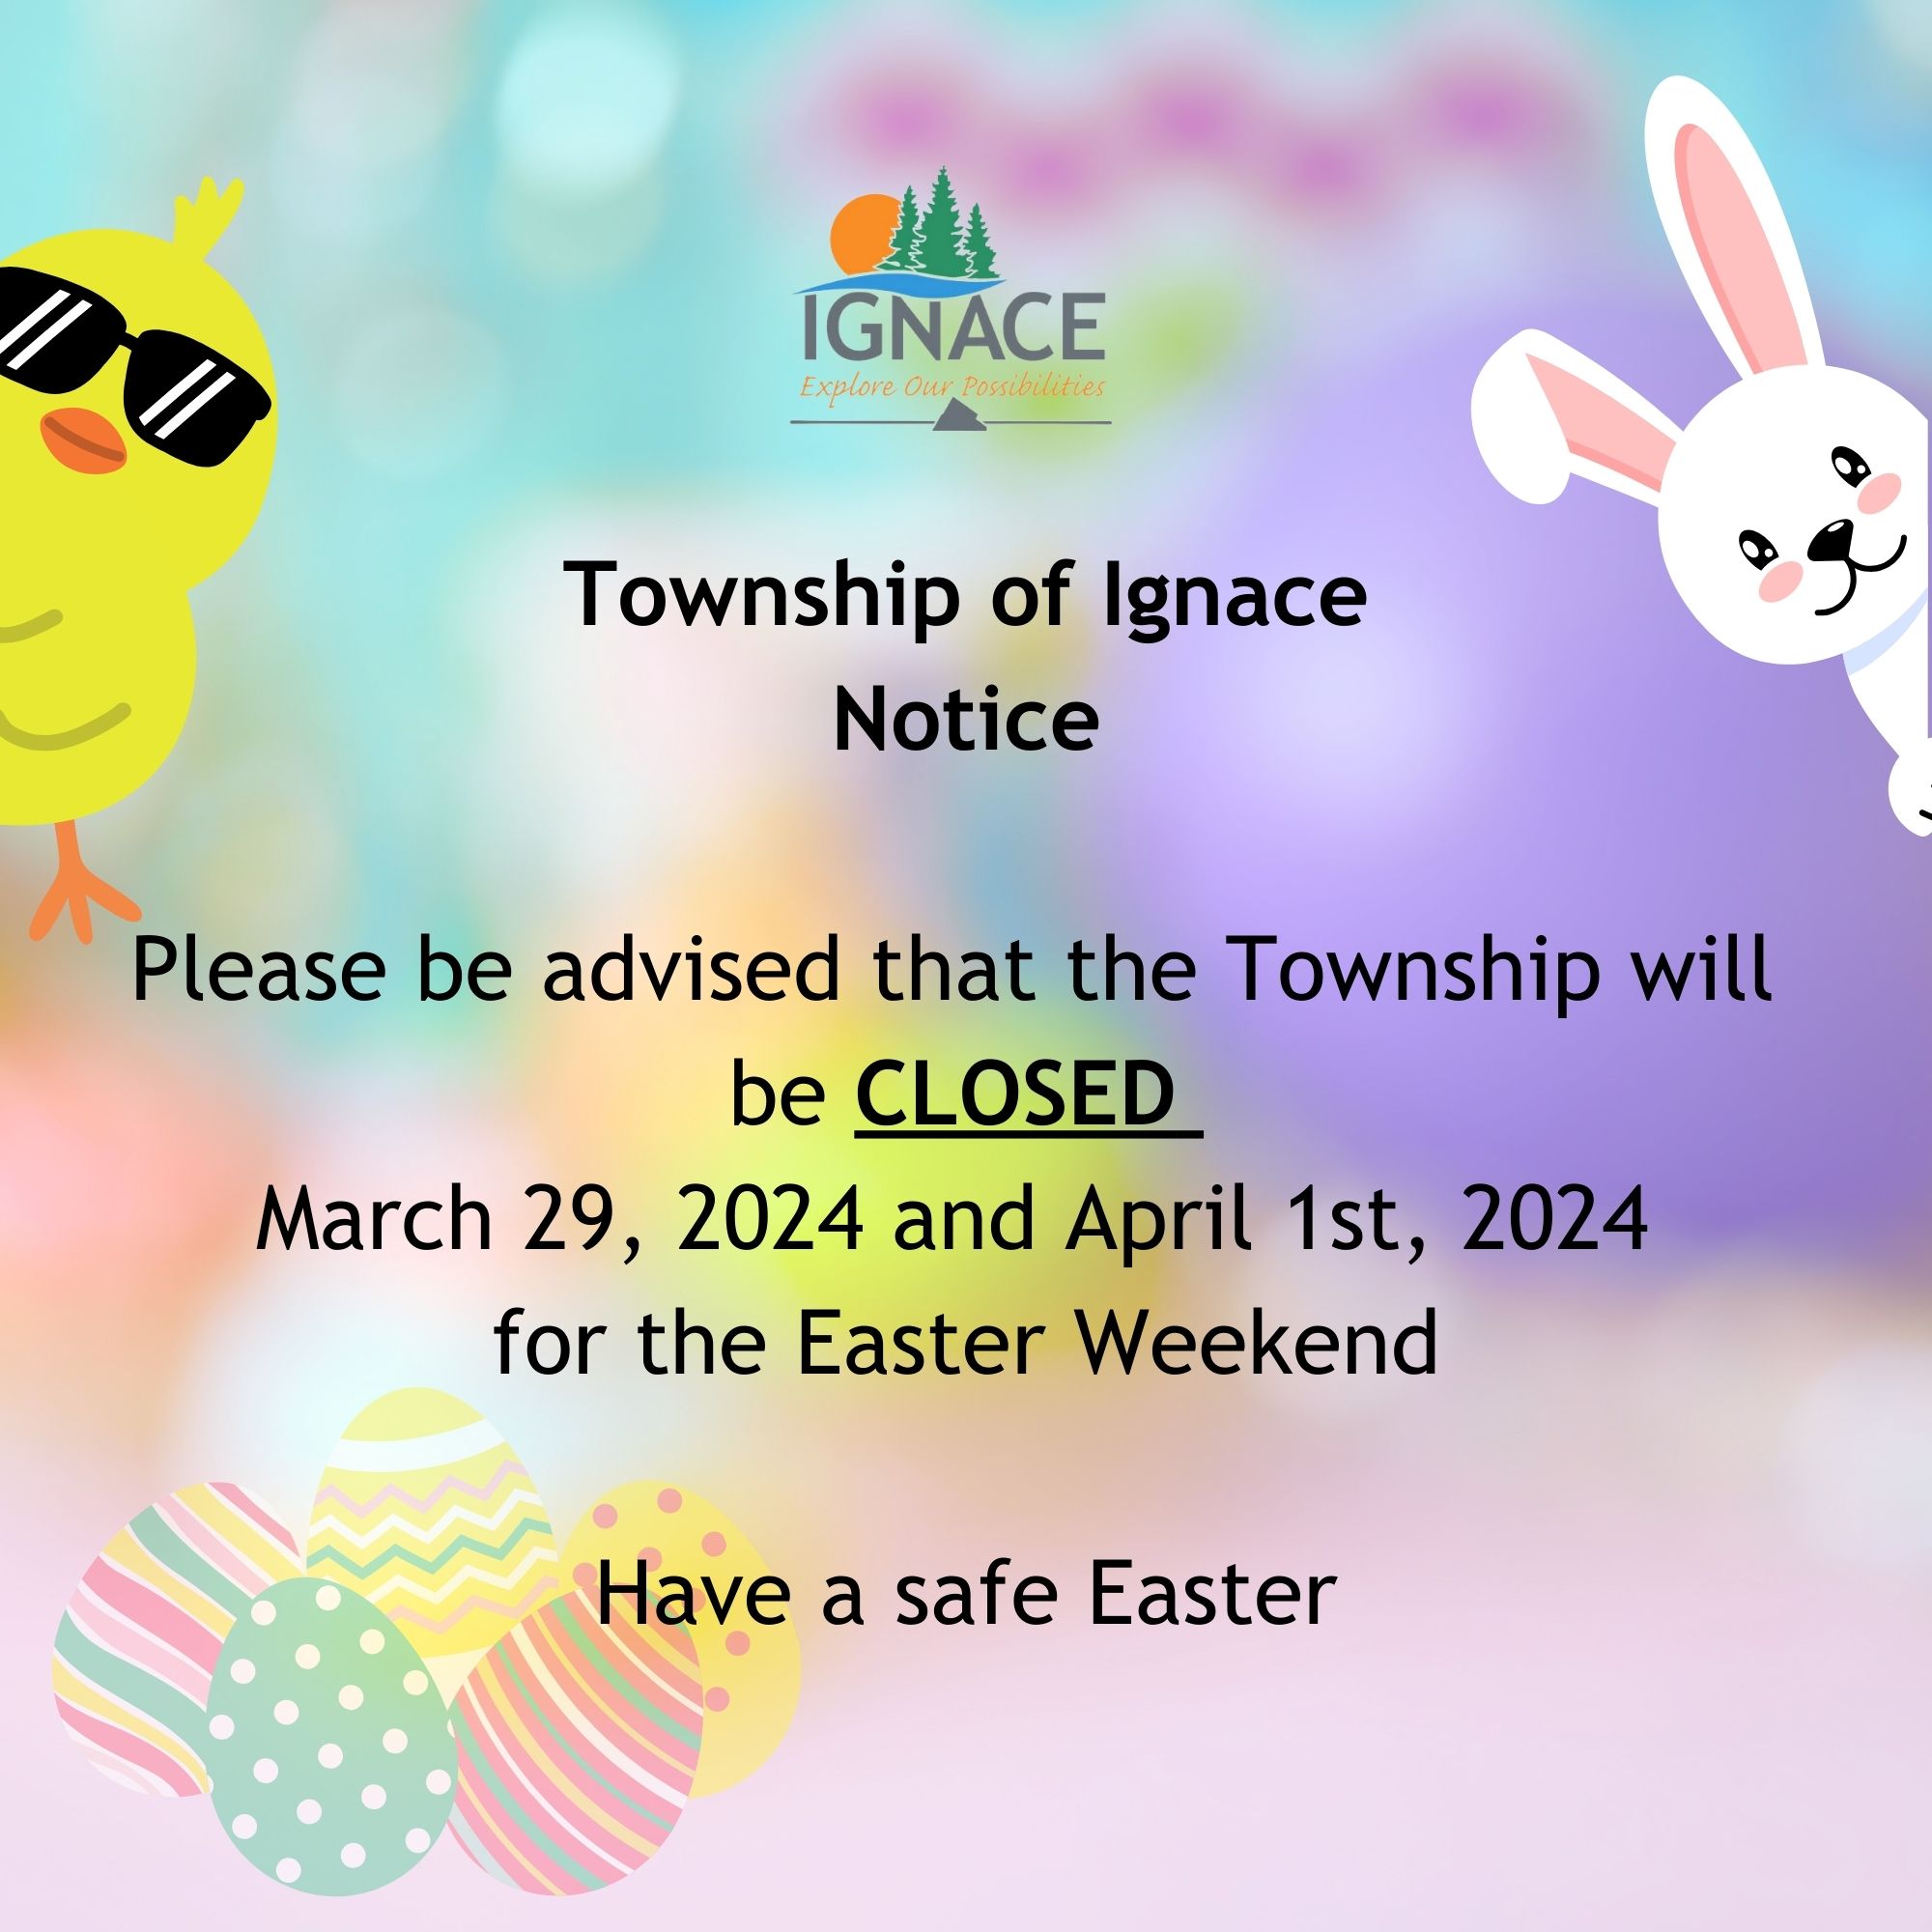 Township_of_Ignace_Notice_Please_be_advised_that_the_Township_will_be_closed_March_29_2024_and_April_1st_2024_for_the_Easter_Weekend_Have_a_safe_Easter.jpg